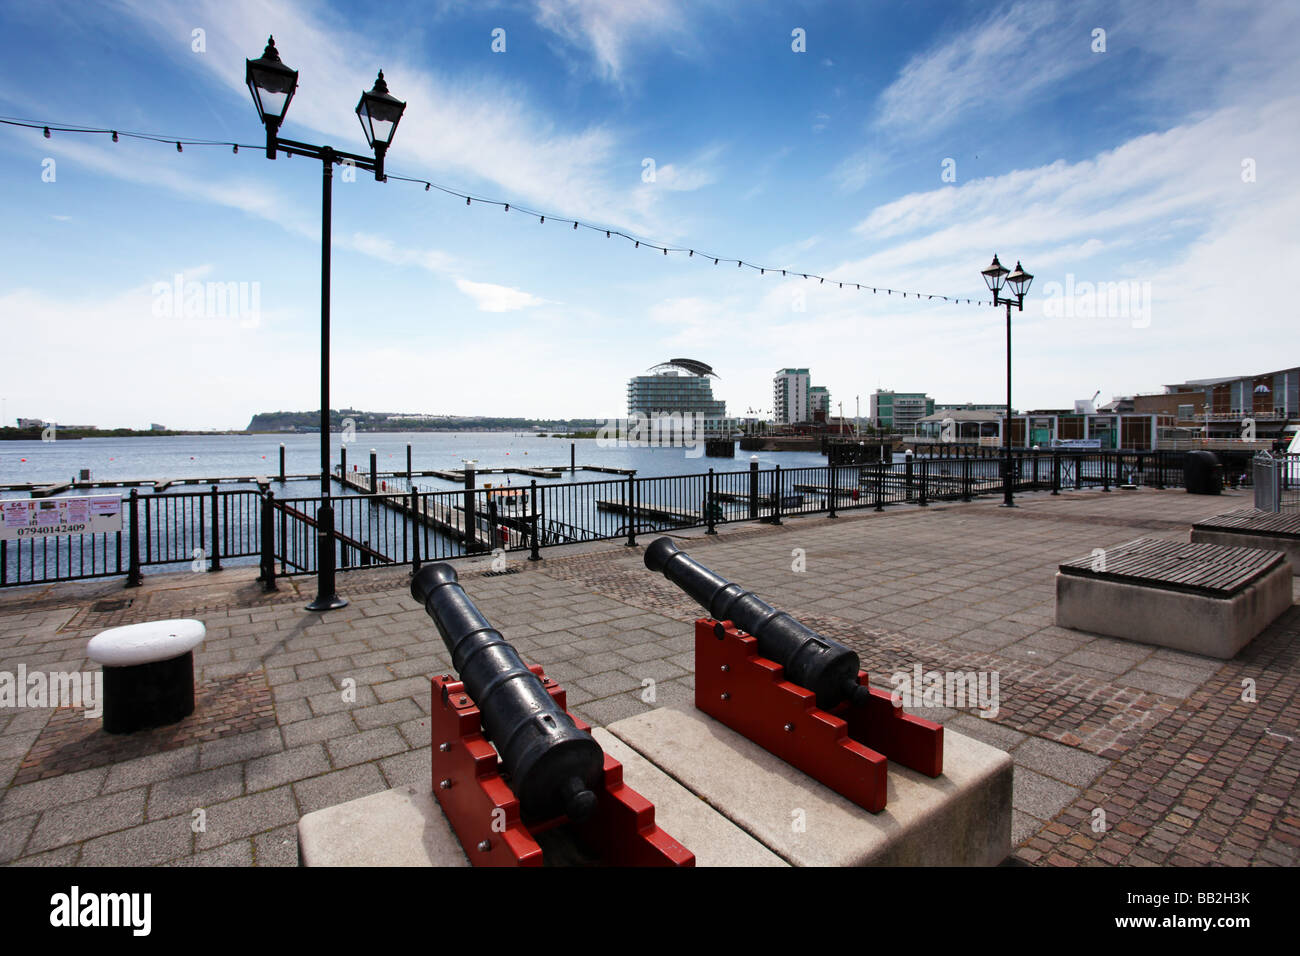 The Cardiff Bay area waterfront with views across the bay towards St David's Hotel and Spa, Cardiff, South Wales, UK Stock Photo